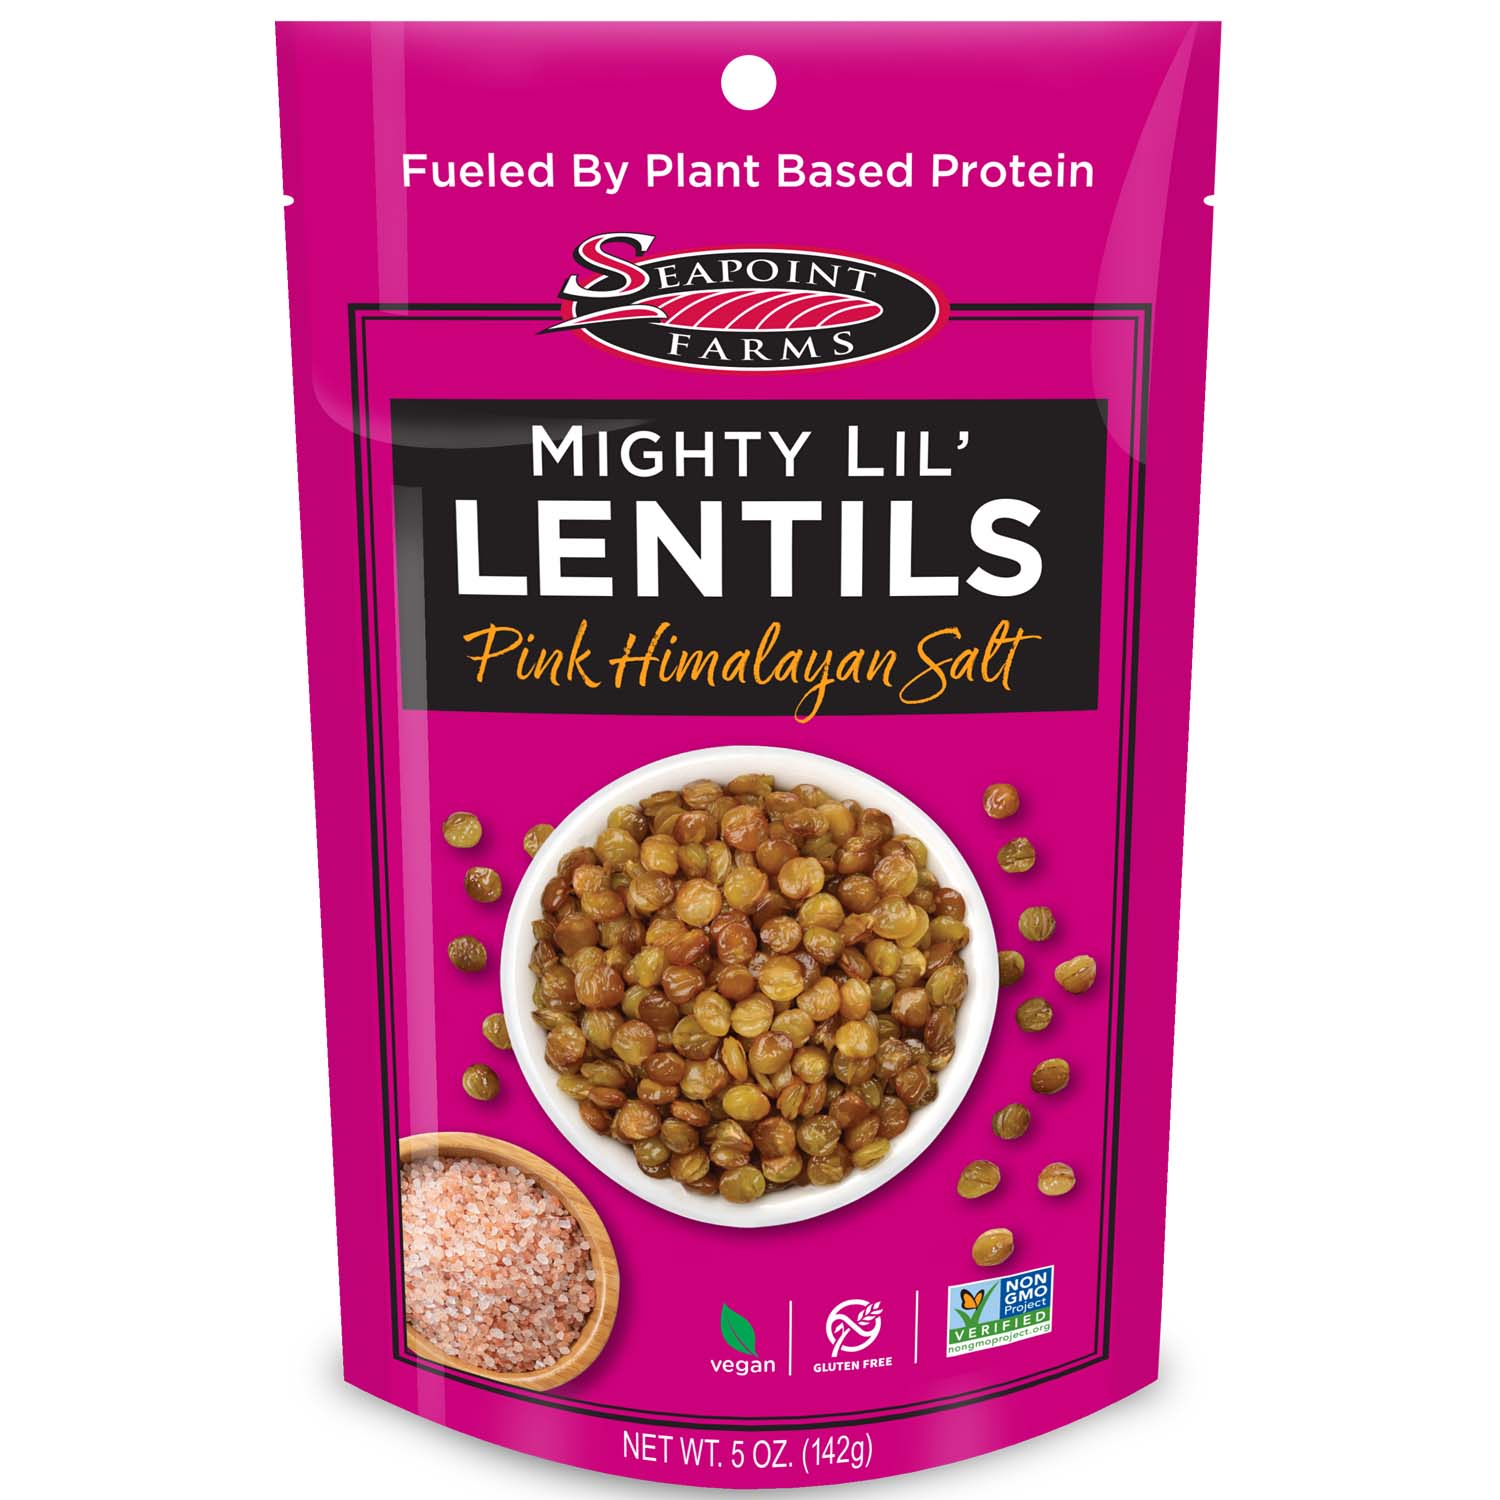 Seapoint Farms Mighty Lil' Lentils, 5 OZ